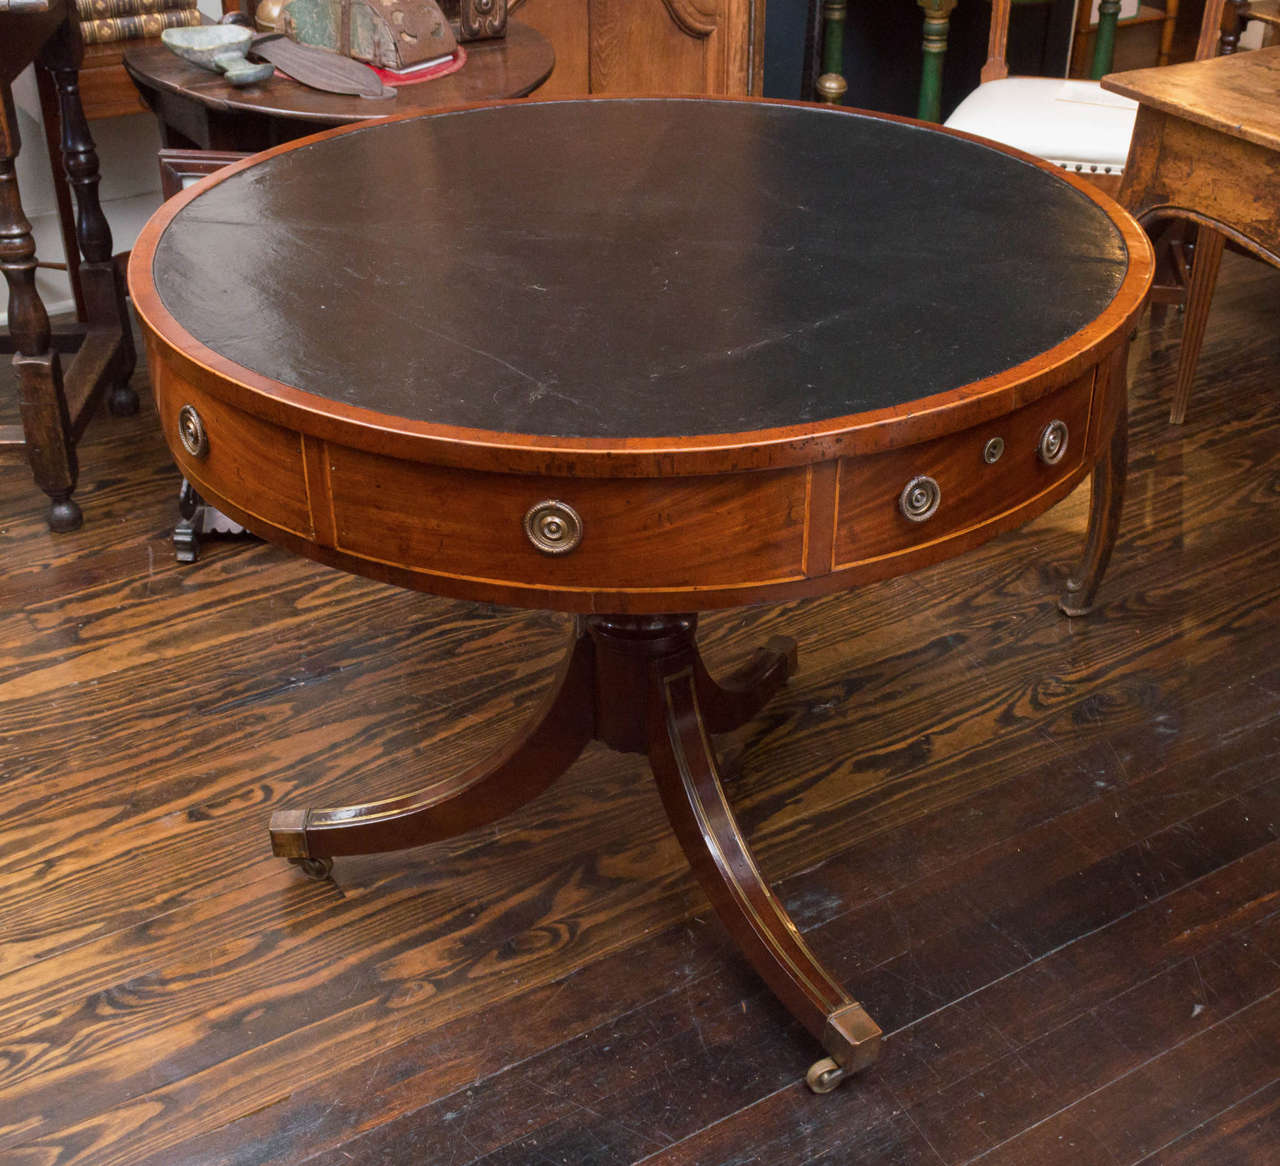 English Regency period drum table of mahogany with four drawers.  Old black leather top and inlaid brass pedestal. Brahma locks (no keys) and original casters. Excellent small size and solid construction. Sitting on the original brass casters.